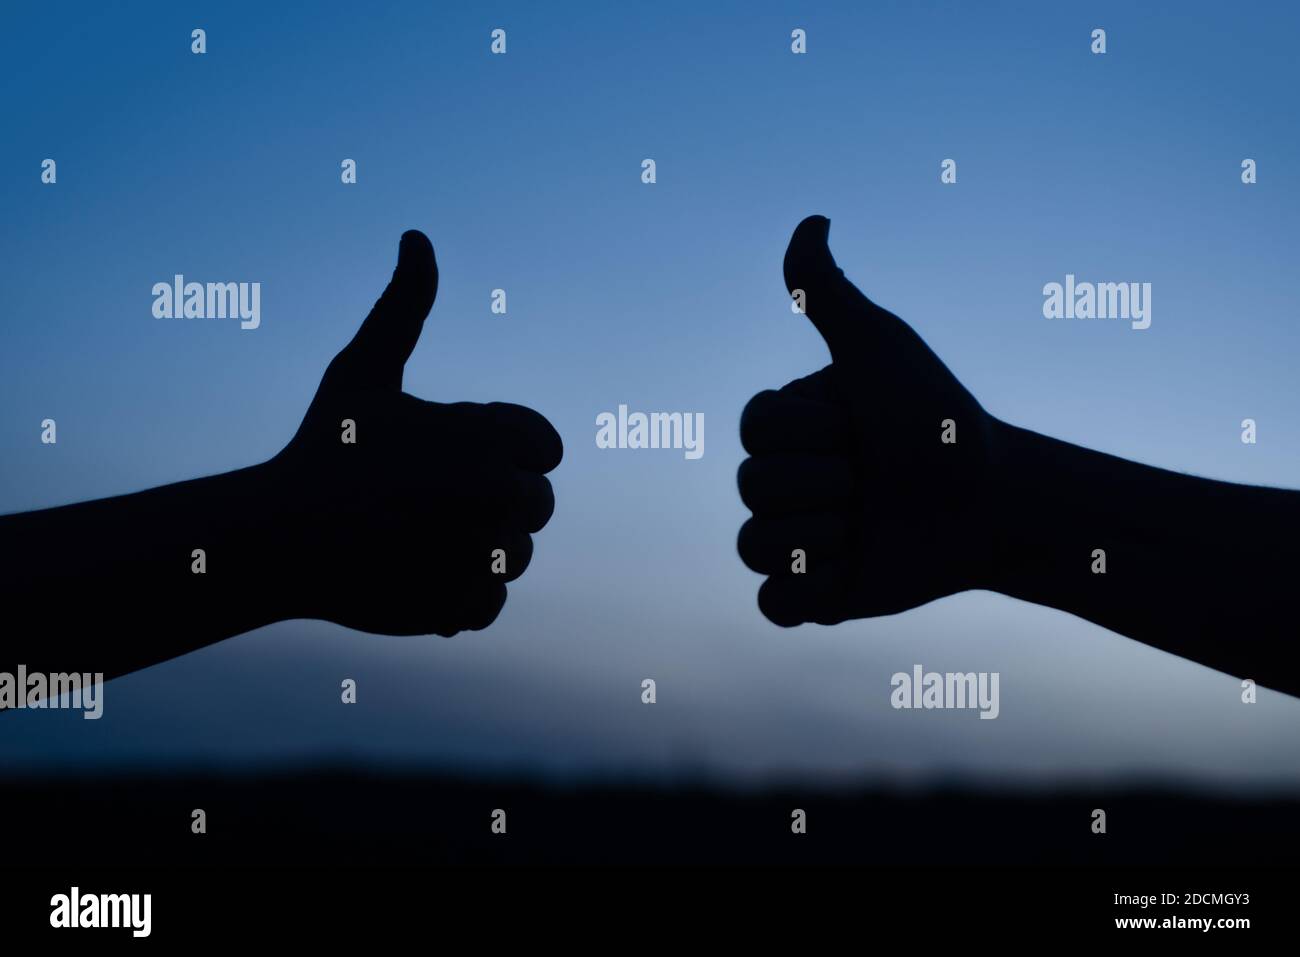 Thumbs up. Agree. Accept. Gesture. Man shows thumbs up. Thumbs up silhouette Stock Photo